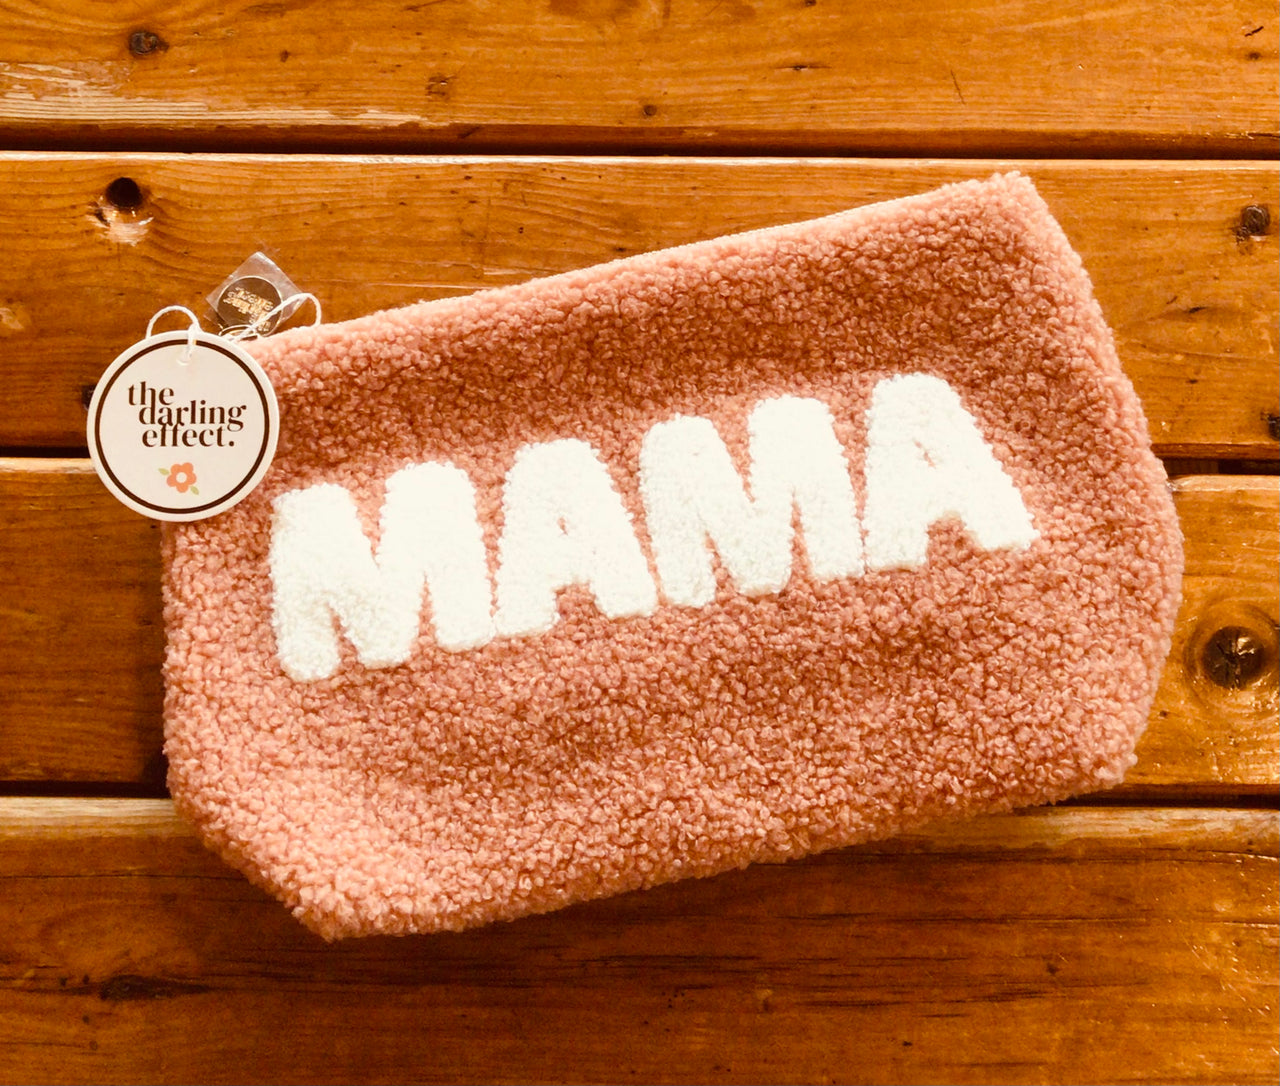 MAMA Teddy Zipped Pouch in Blush by The Darling Effect